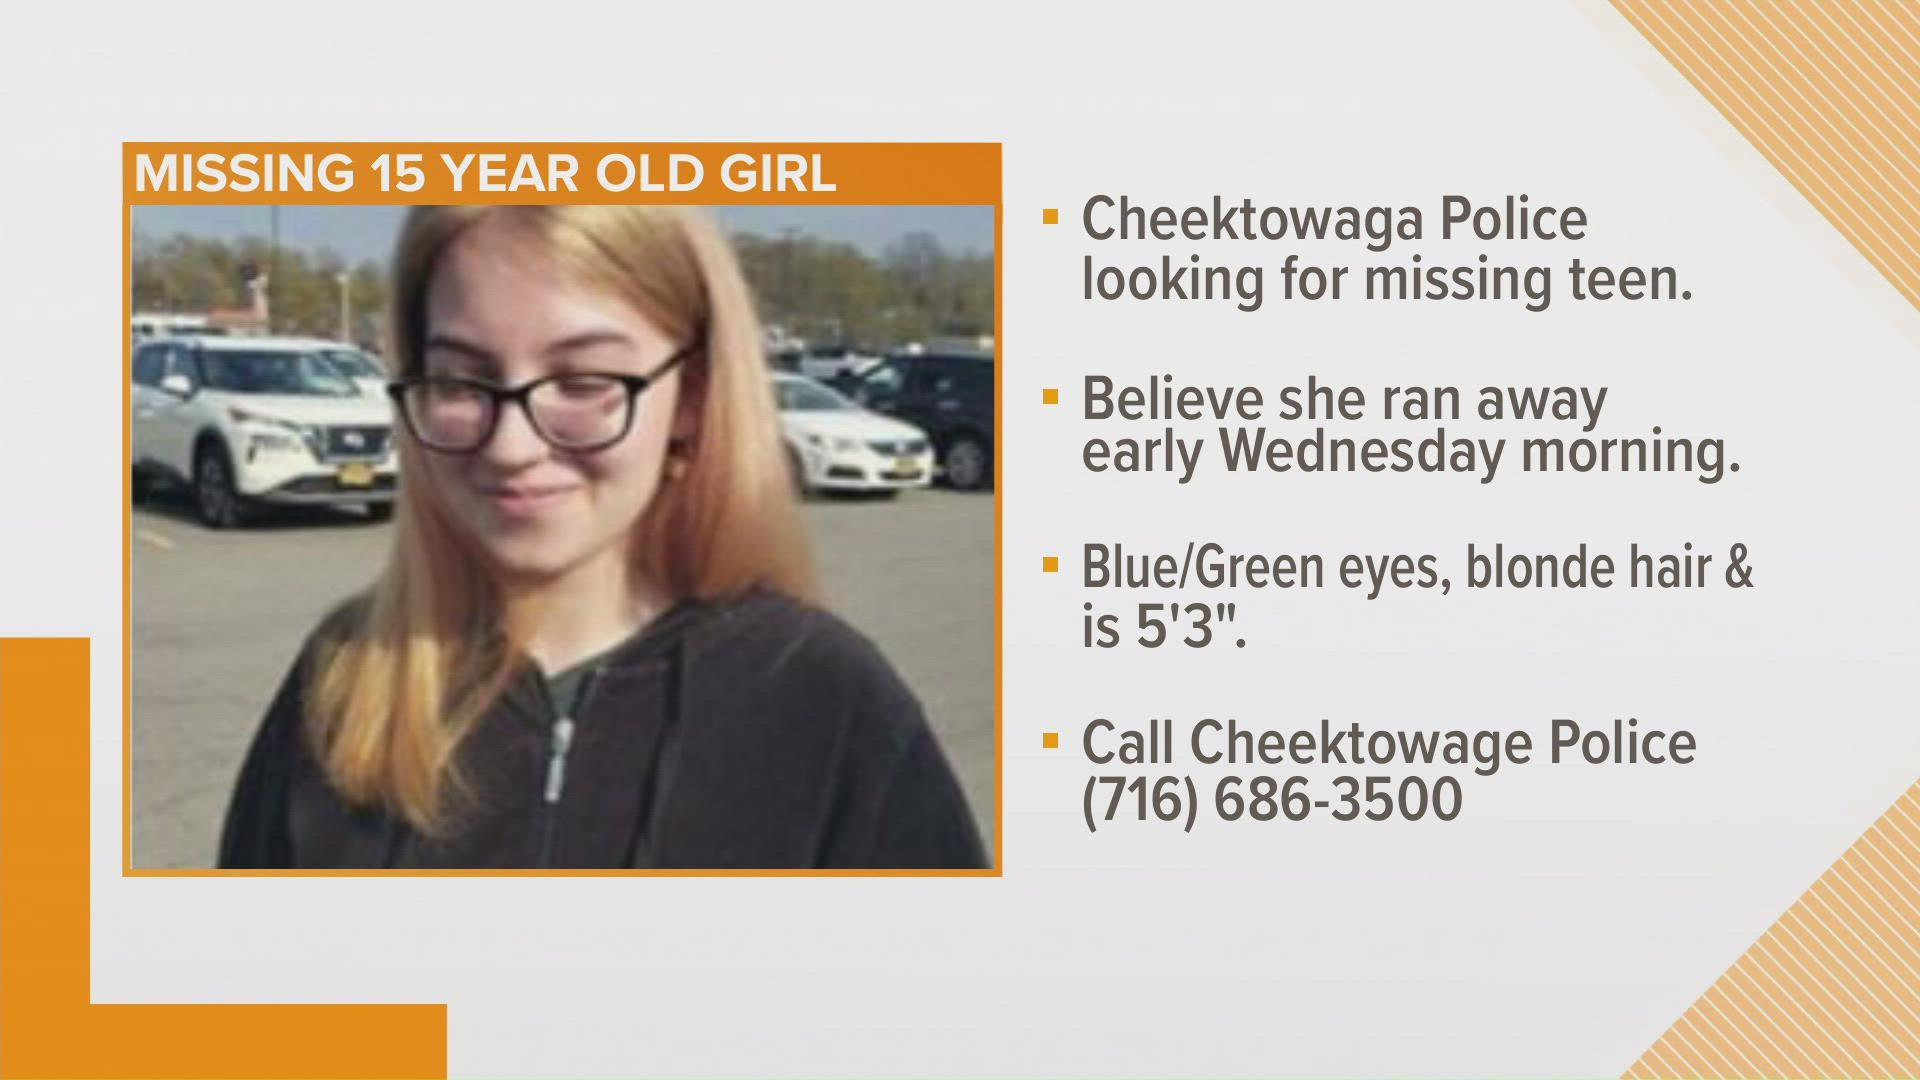 The Cheektowaga Police Department needs your help looking for a 15 year old girl.